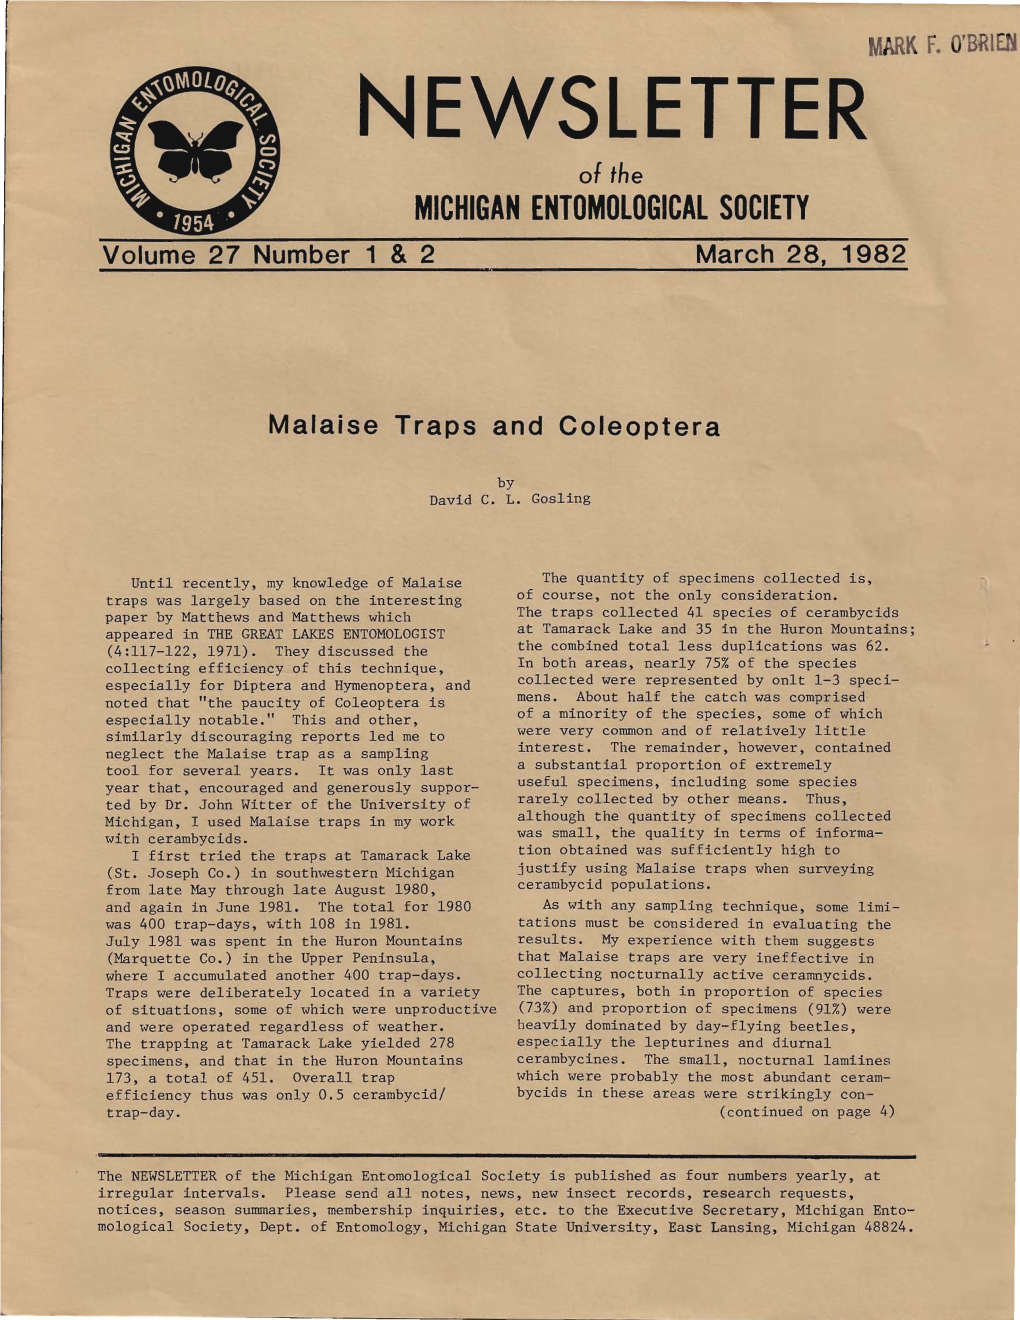 NEWSLETTER of the MICHIGAN ENTOMOLOGICAL SOCIETY Volume 27 Number 1 & 2 March 28, 1982